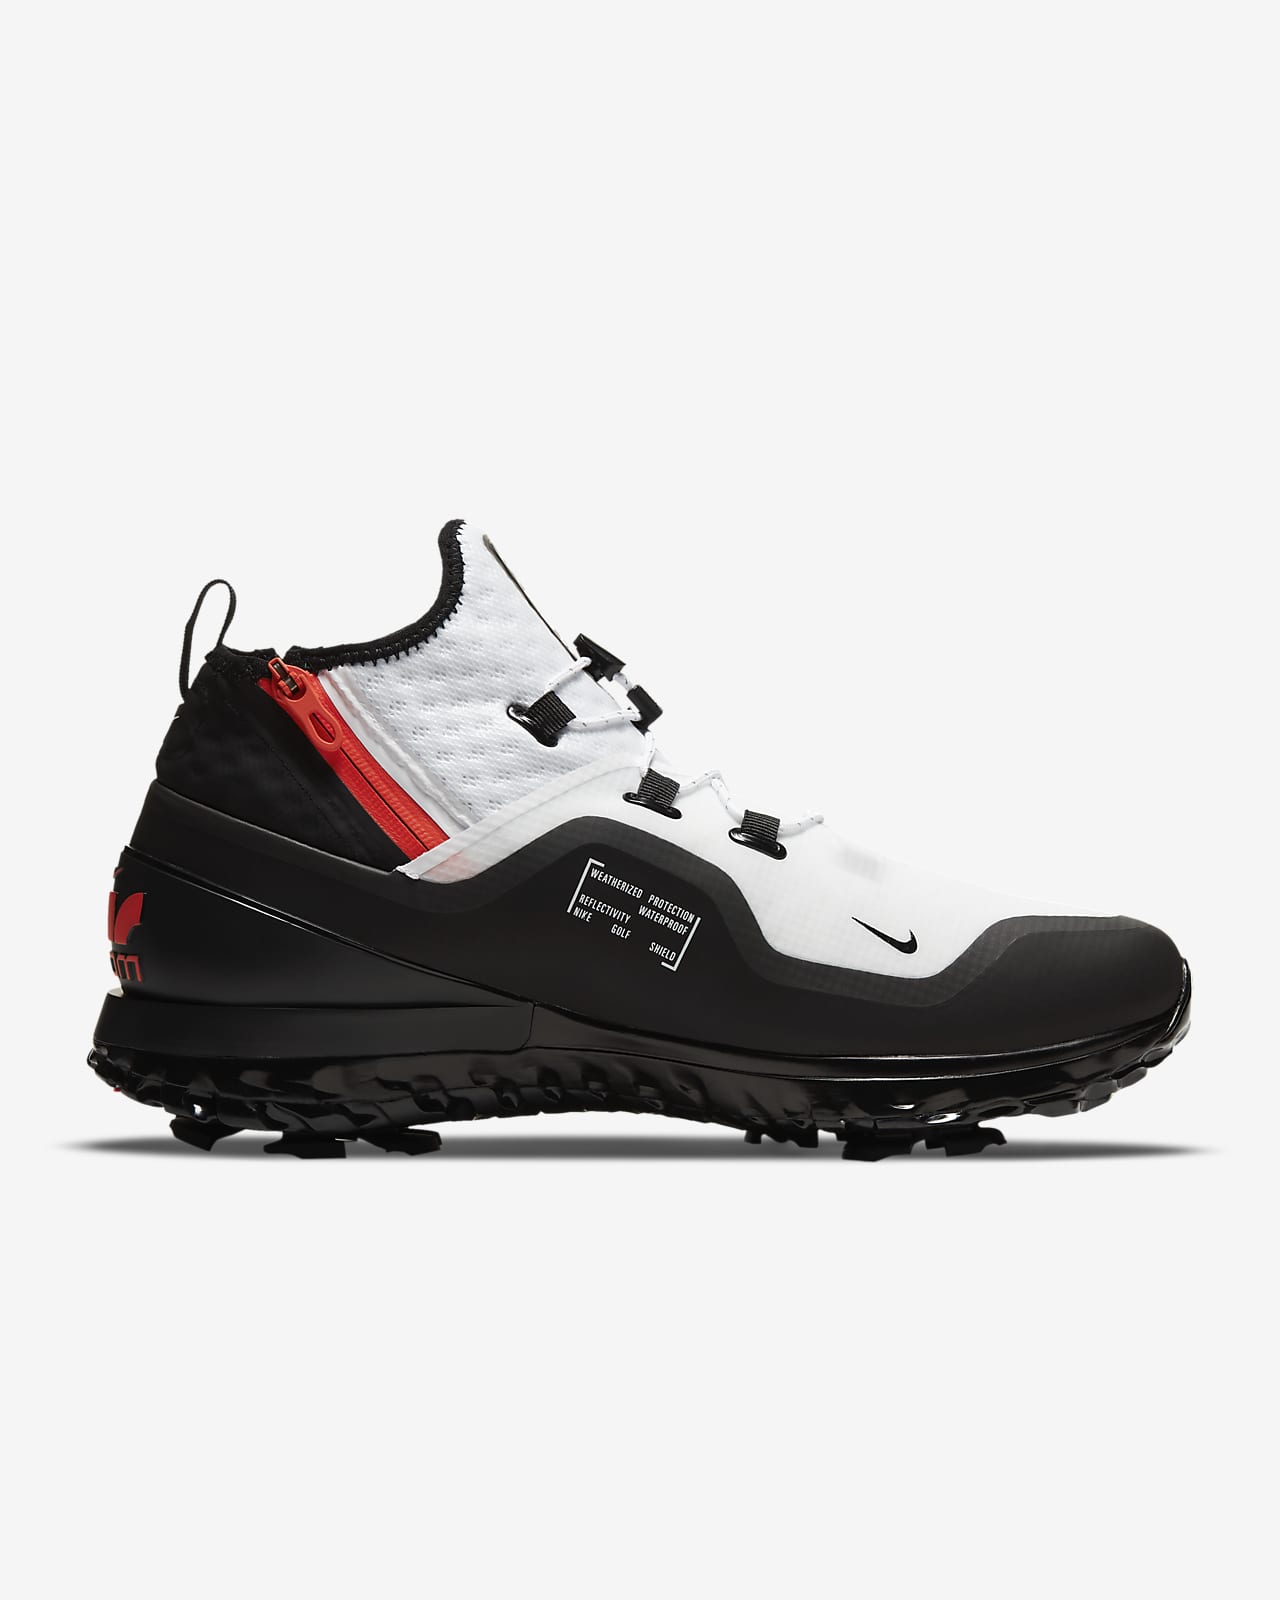 air zoom infinity tour shield